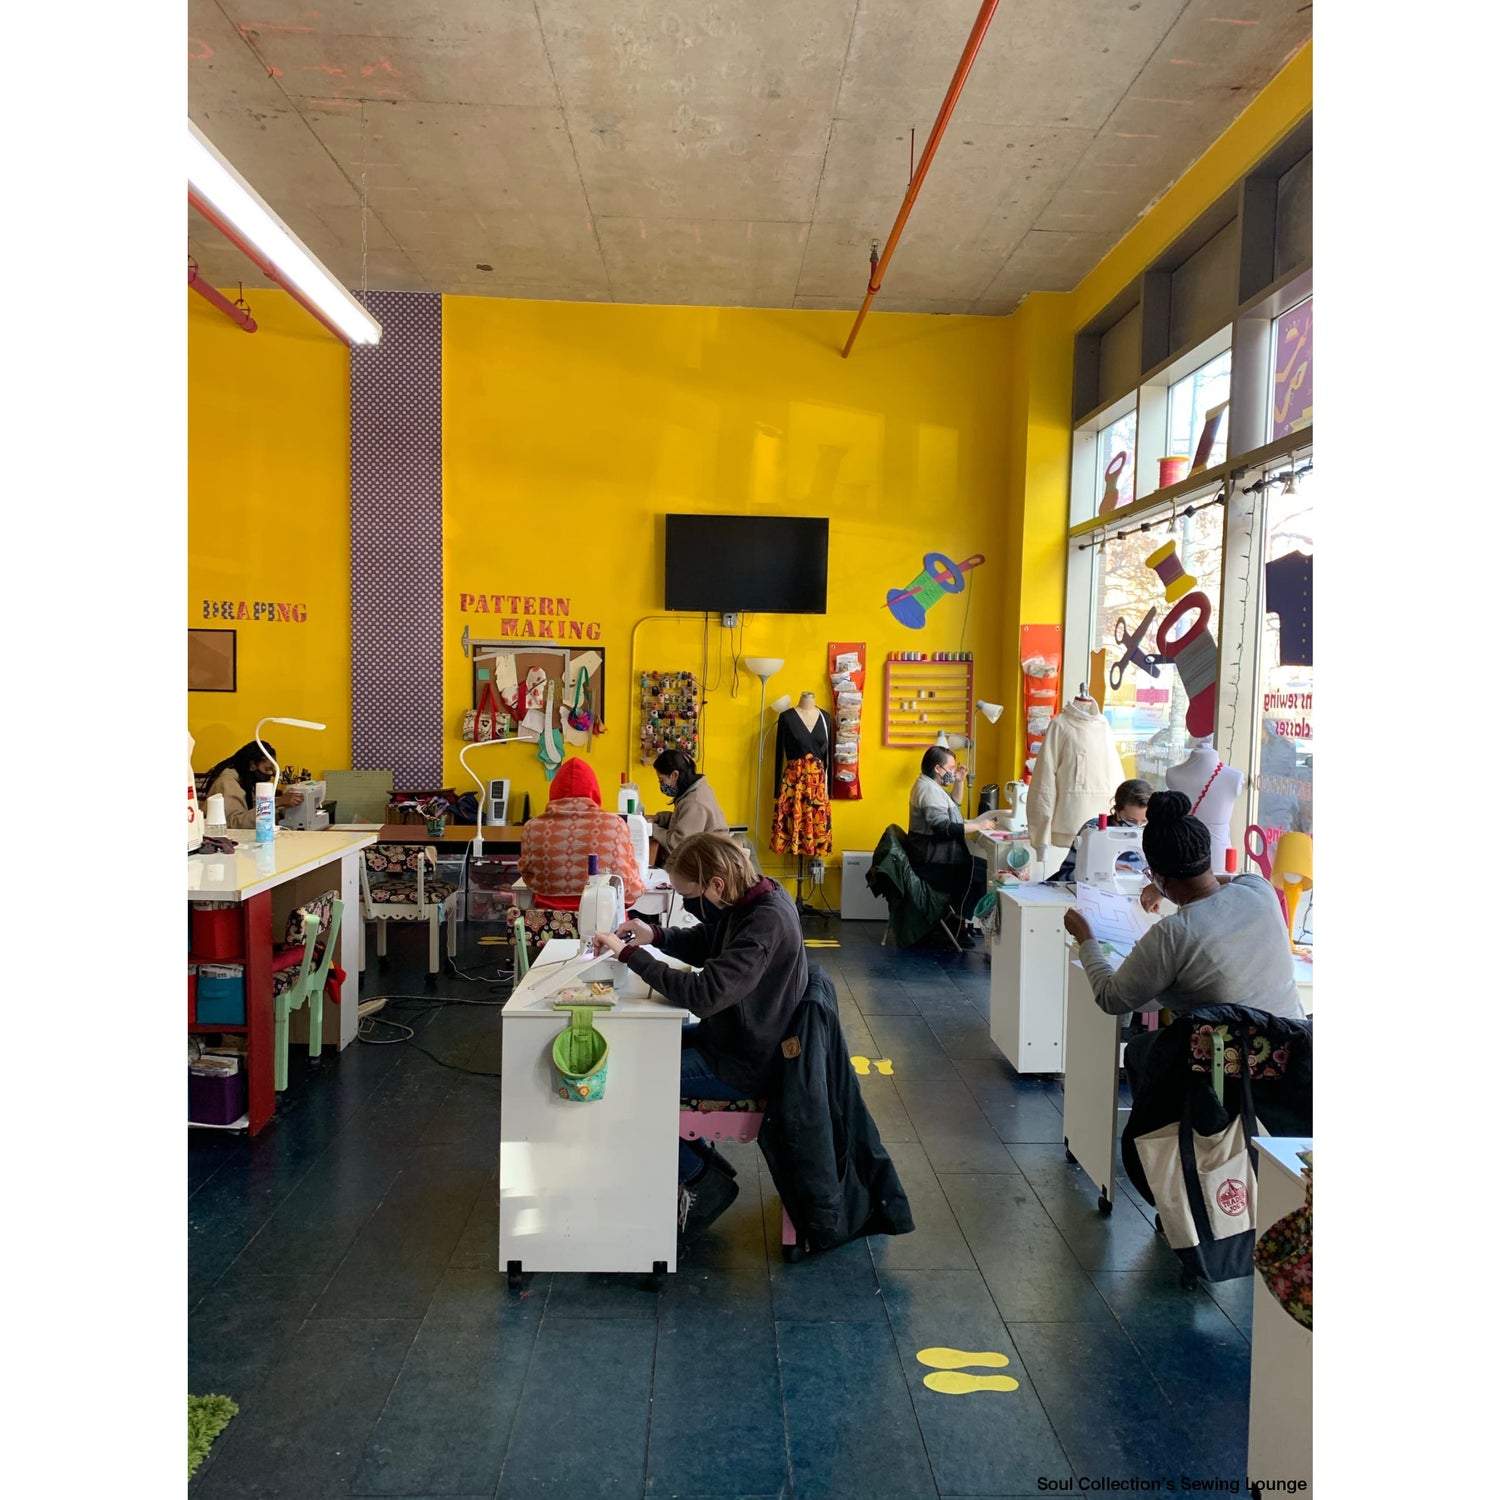 Beginners Sewing Classes In Shop - Sewing Classes